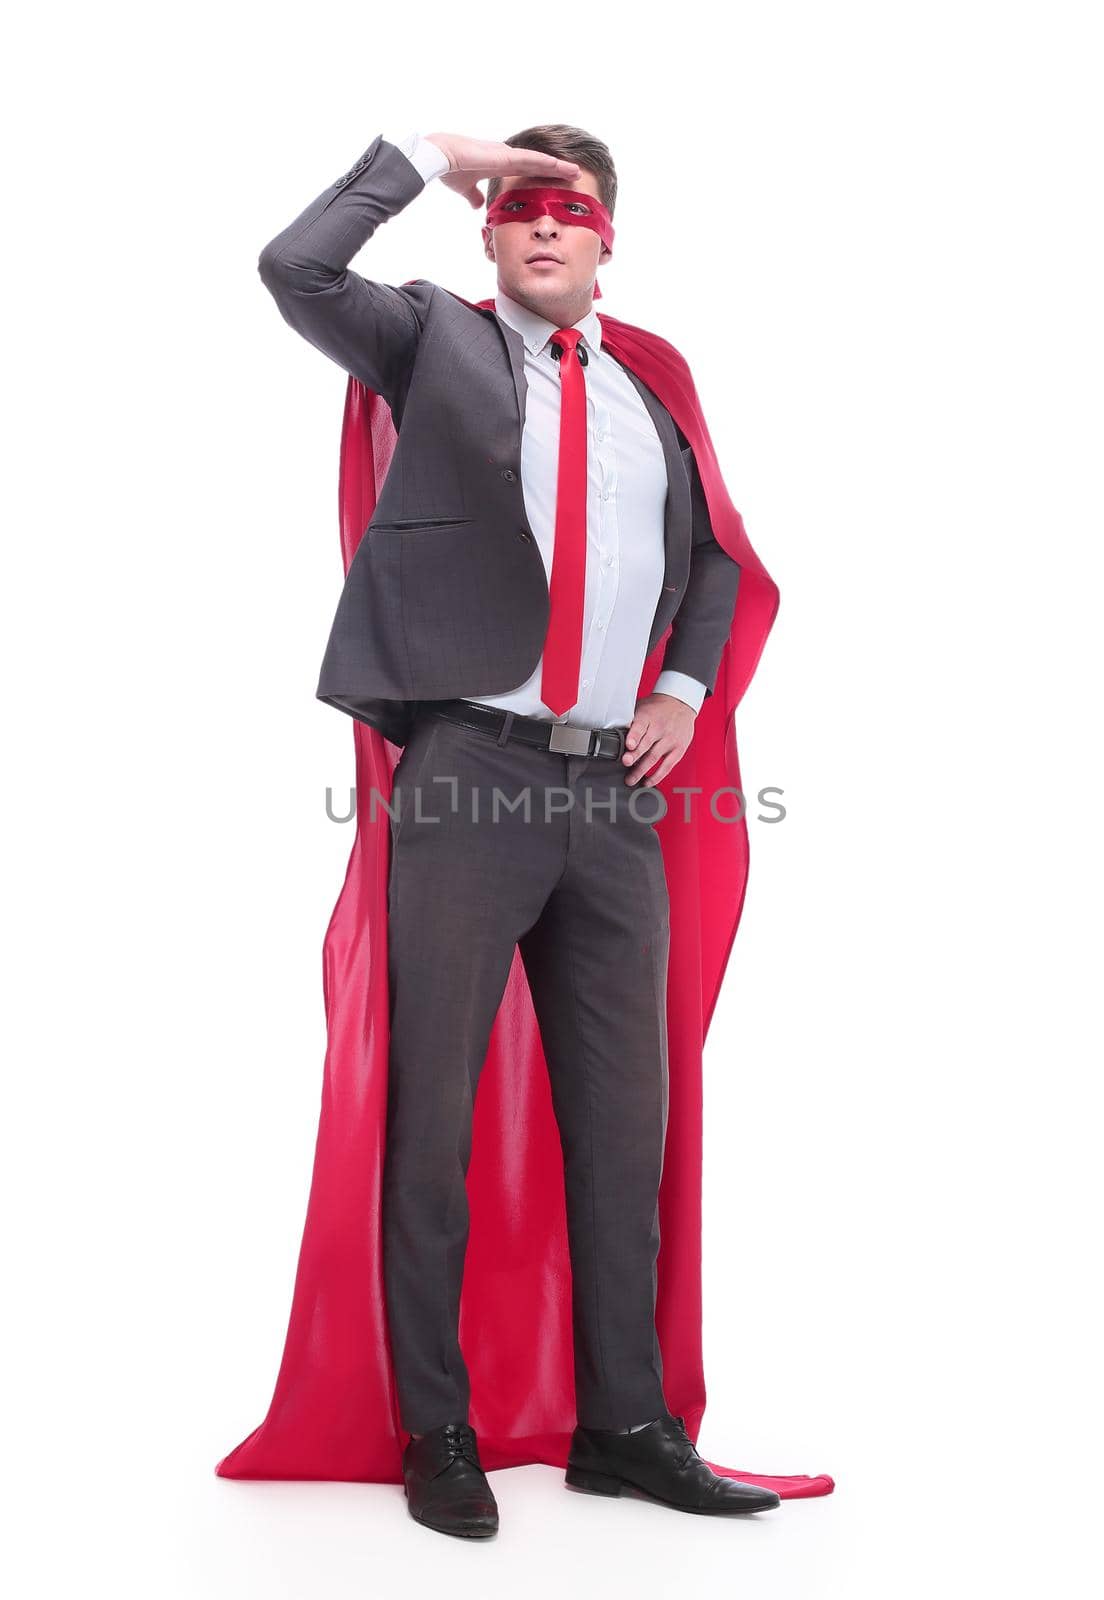 attentive superhero businessman looking into the distance by asdf